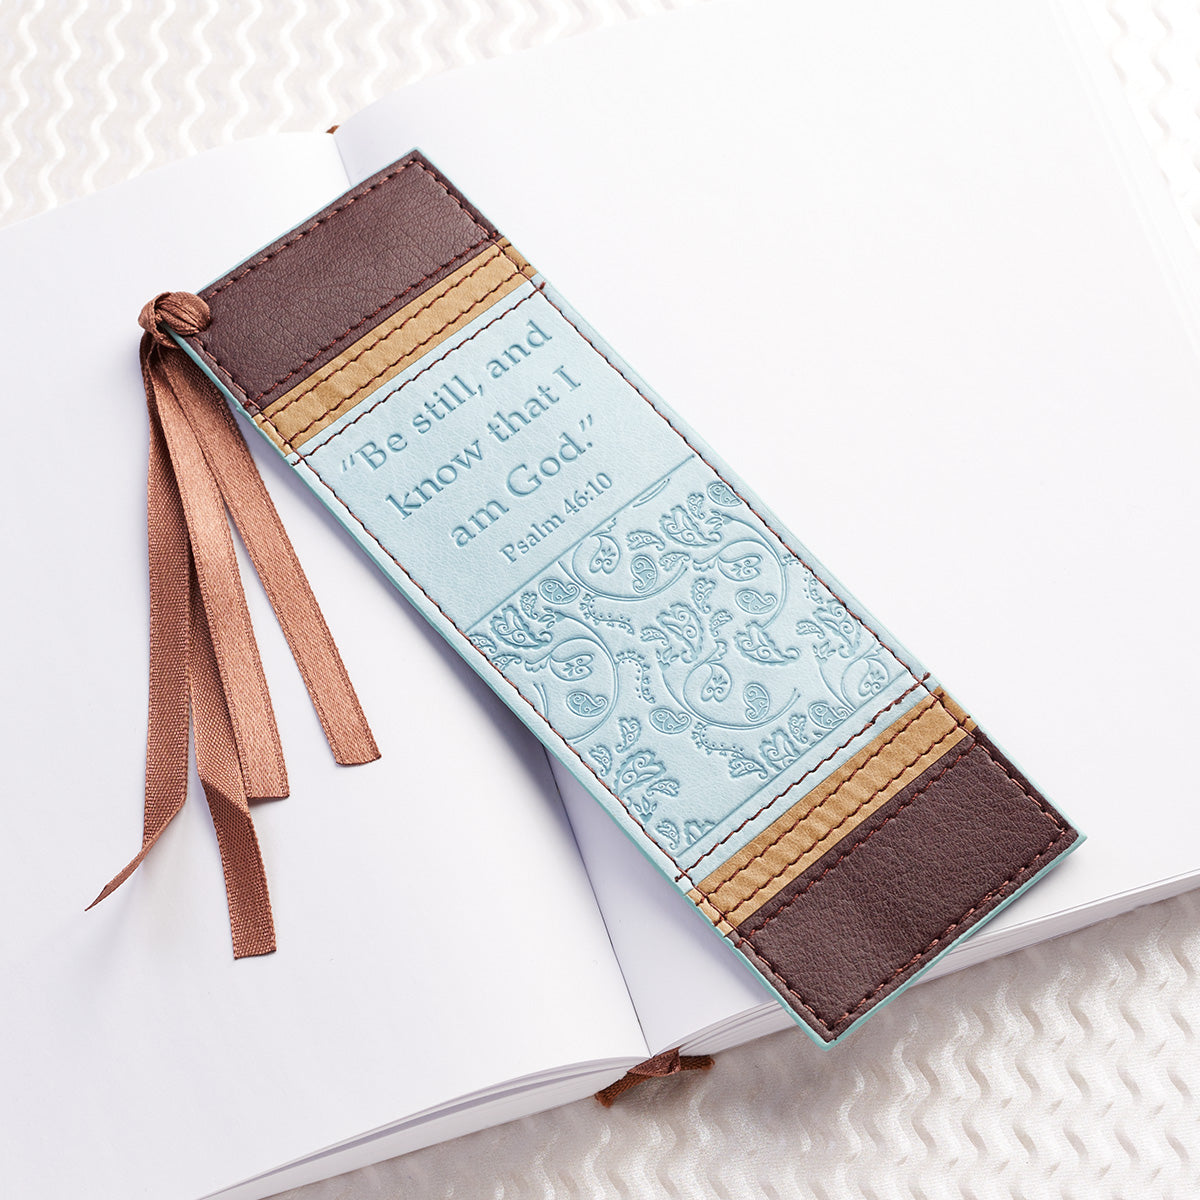 Be Still and Know That I Am God Faux Leather Bookmark - Psalm 46:10 - The Christian Gift Company